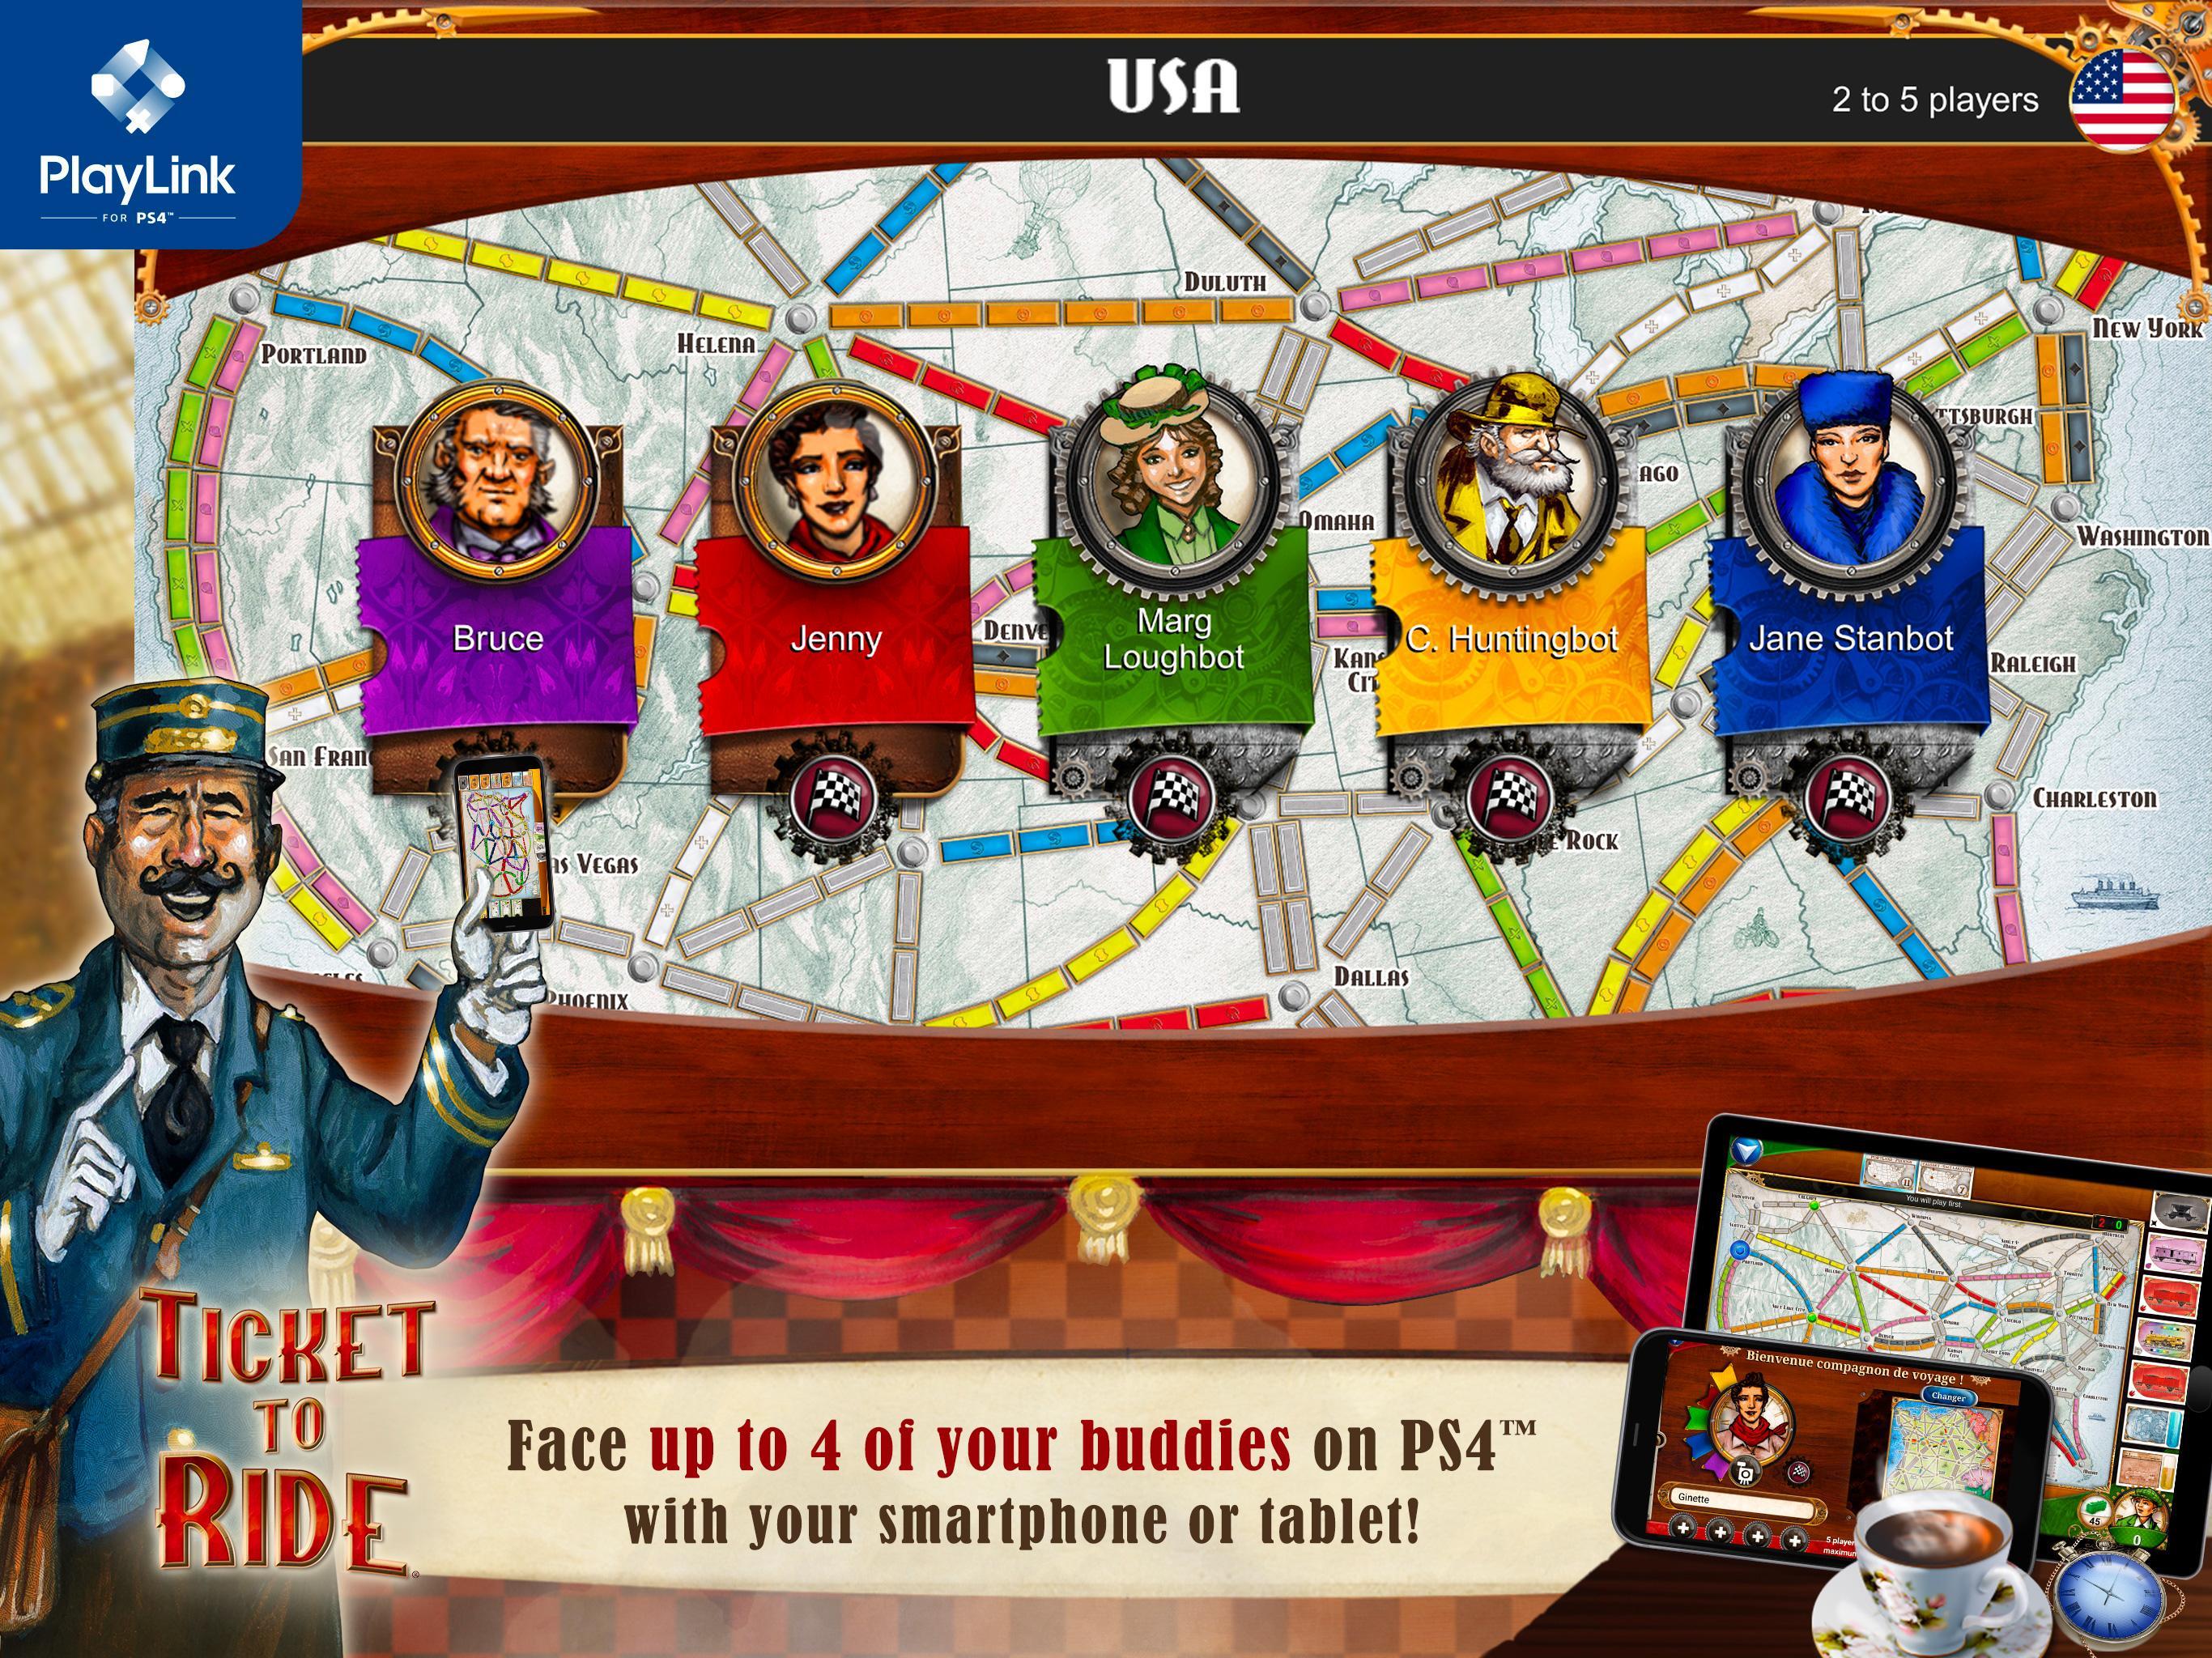 Ticket to Ride for PlayLink 2.7.2-6472-ceb1ea16 Screenshot 6